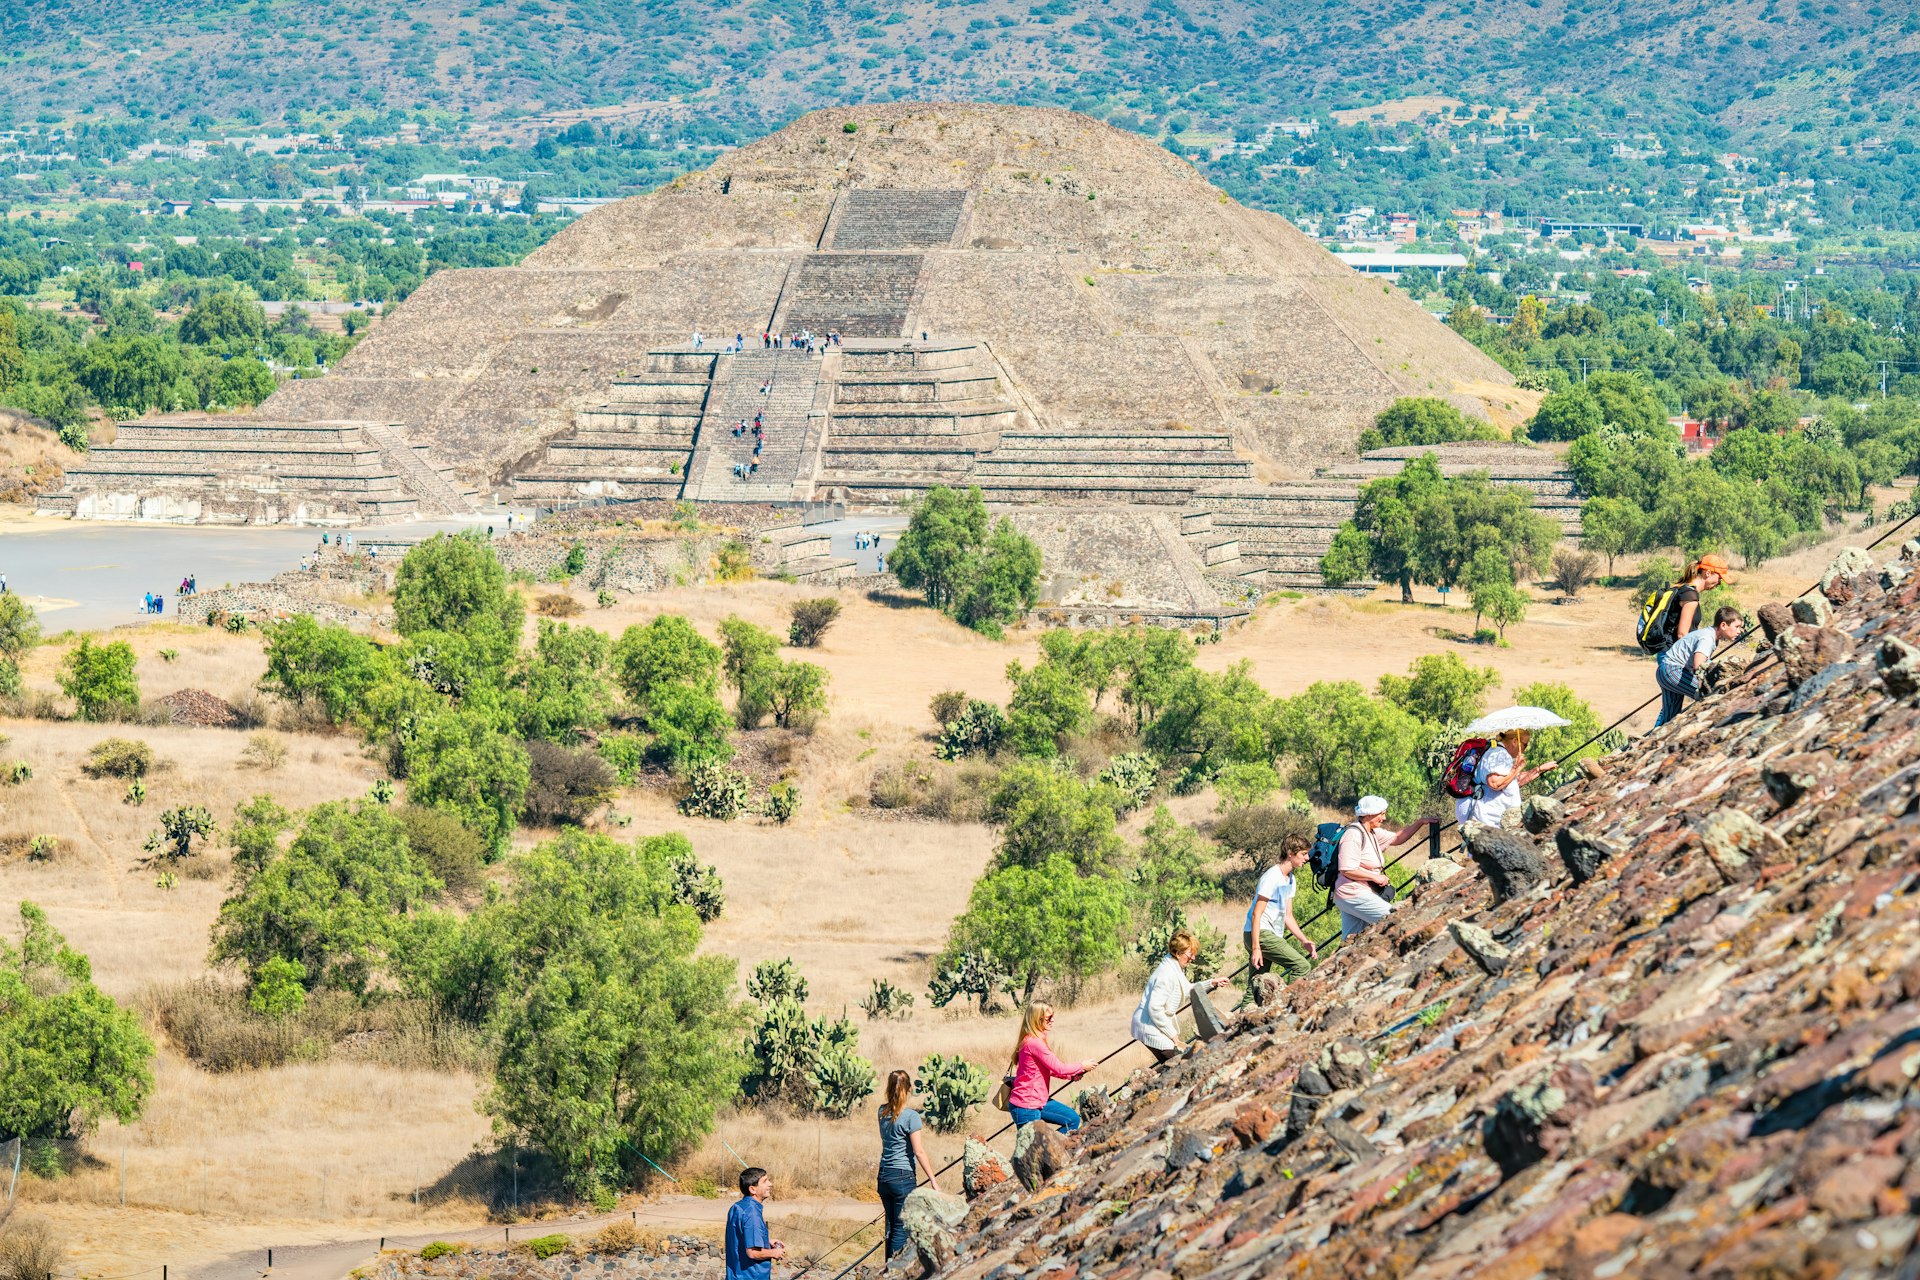 Tourists climb the Pyramid of the Sun at the Teotihuacan pyramids, near Mexico City, Mexico on a sunny day, with the Pyramid of the Moon in the background. 